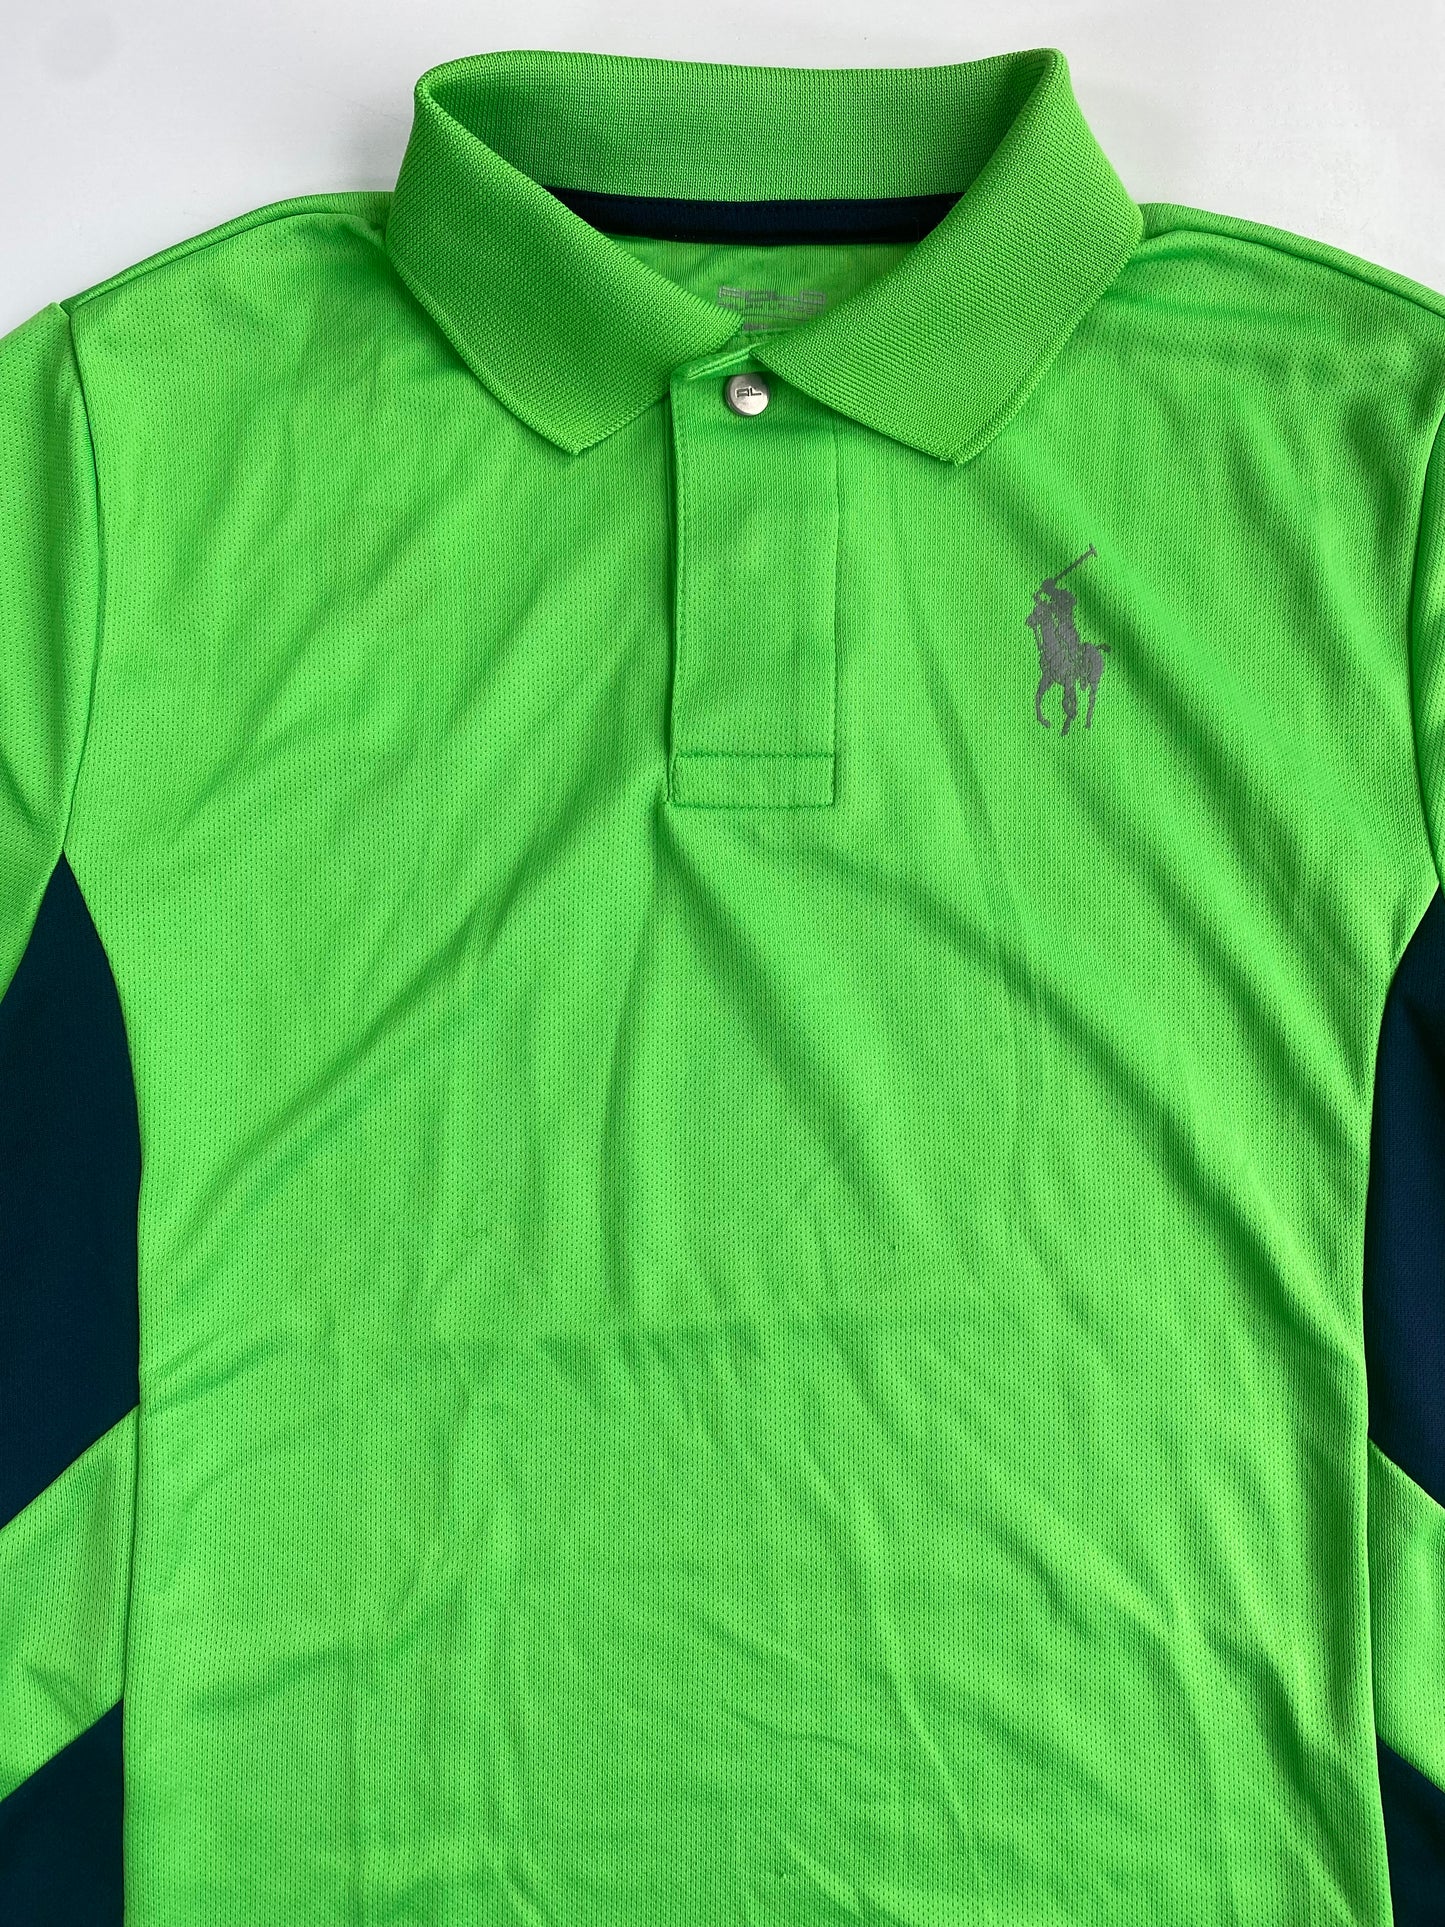 POLO RALPH LAUREN Athletic Polo SS / 8-10Y